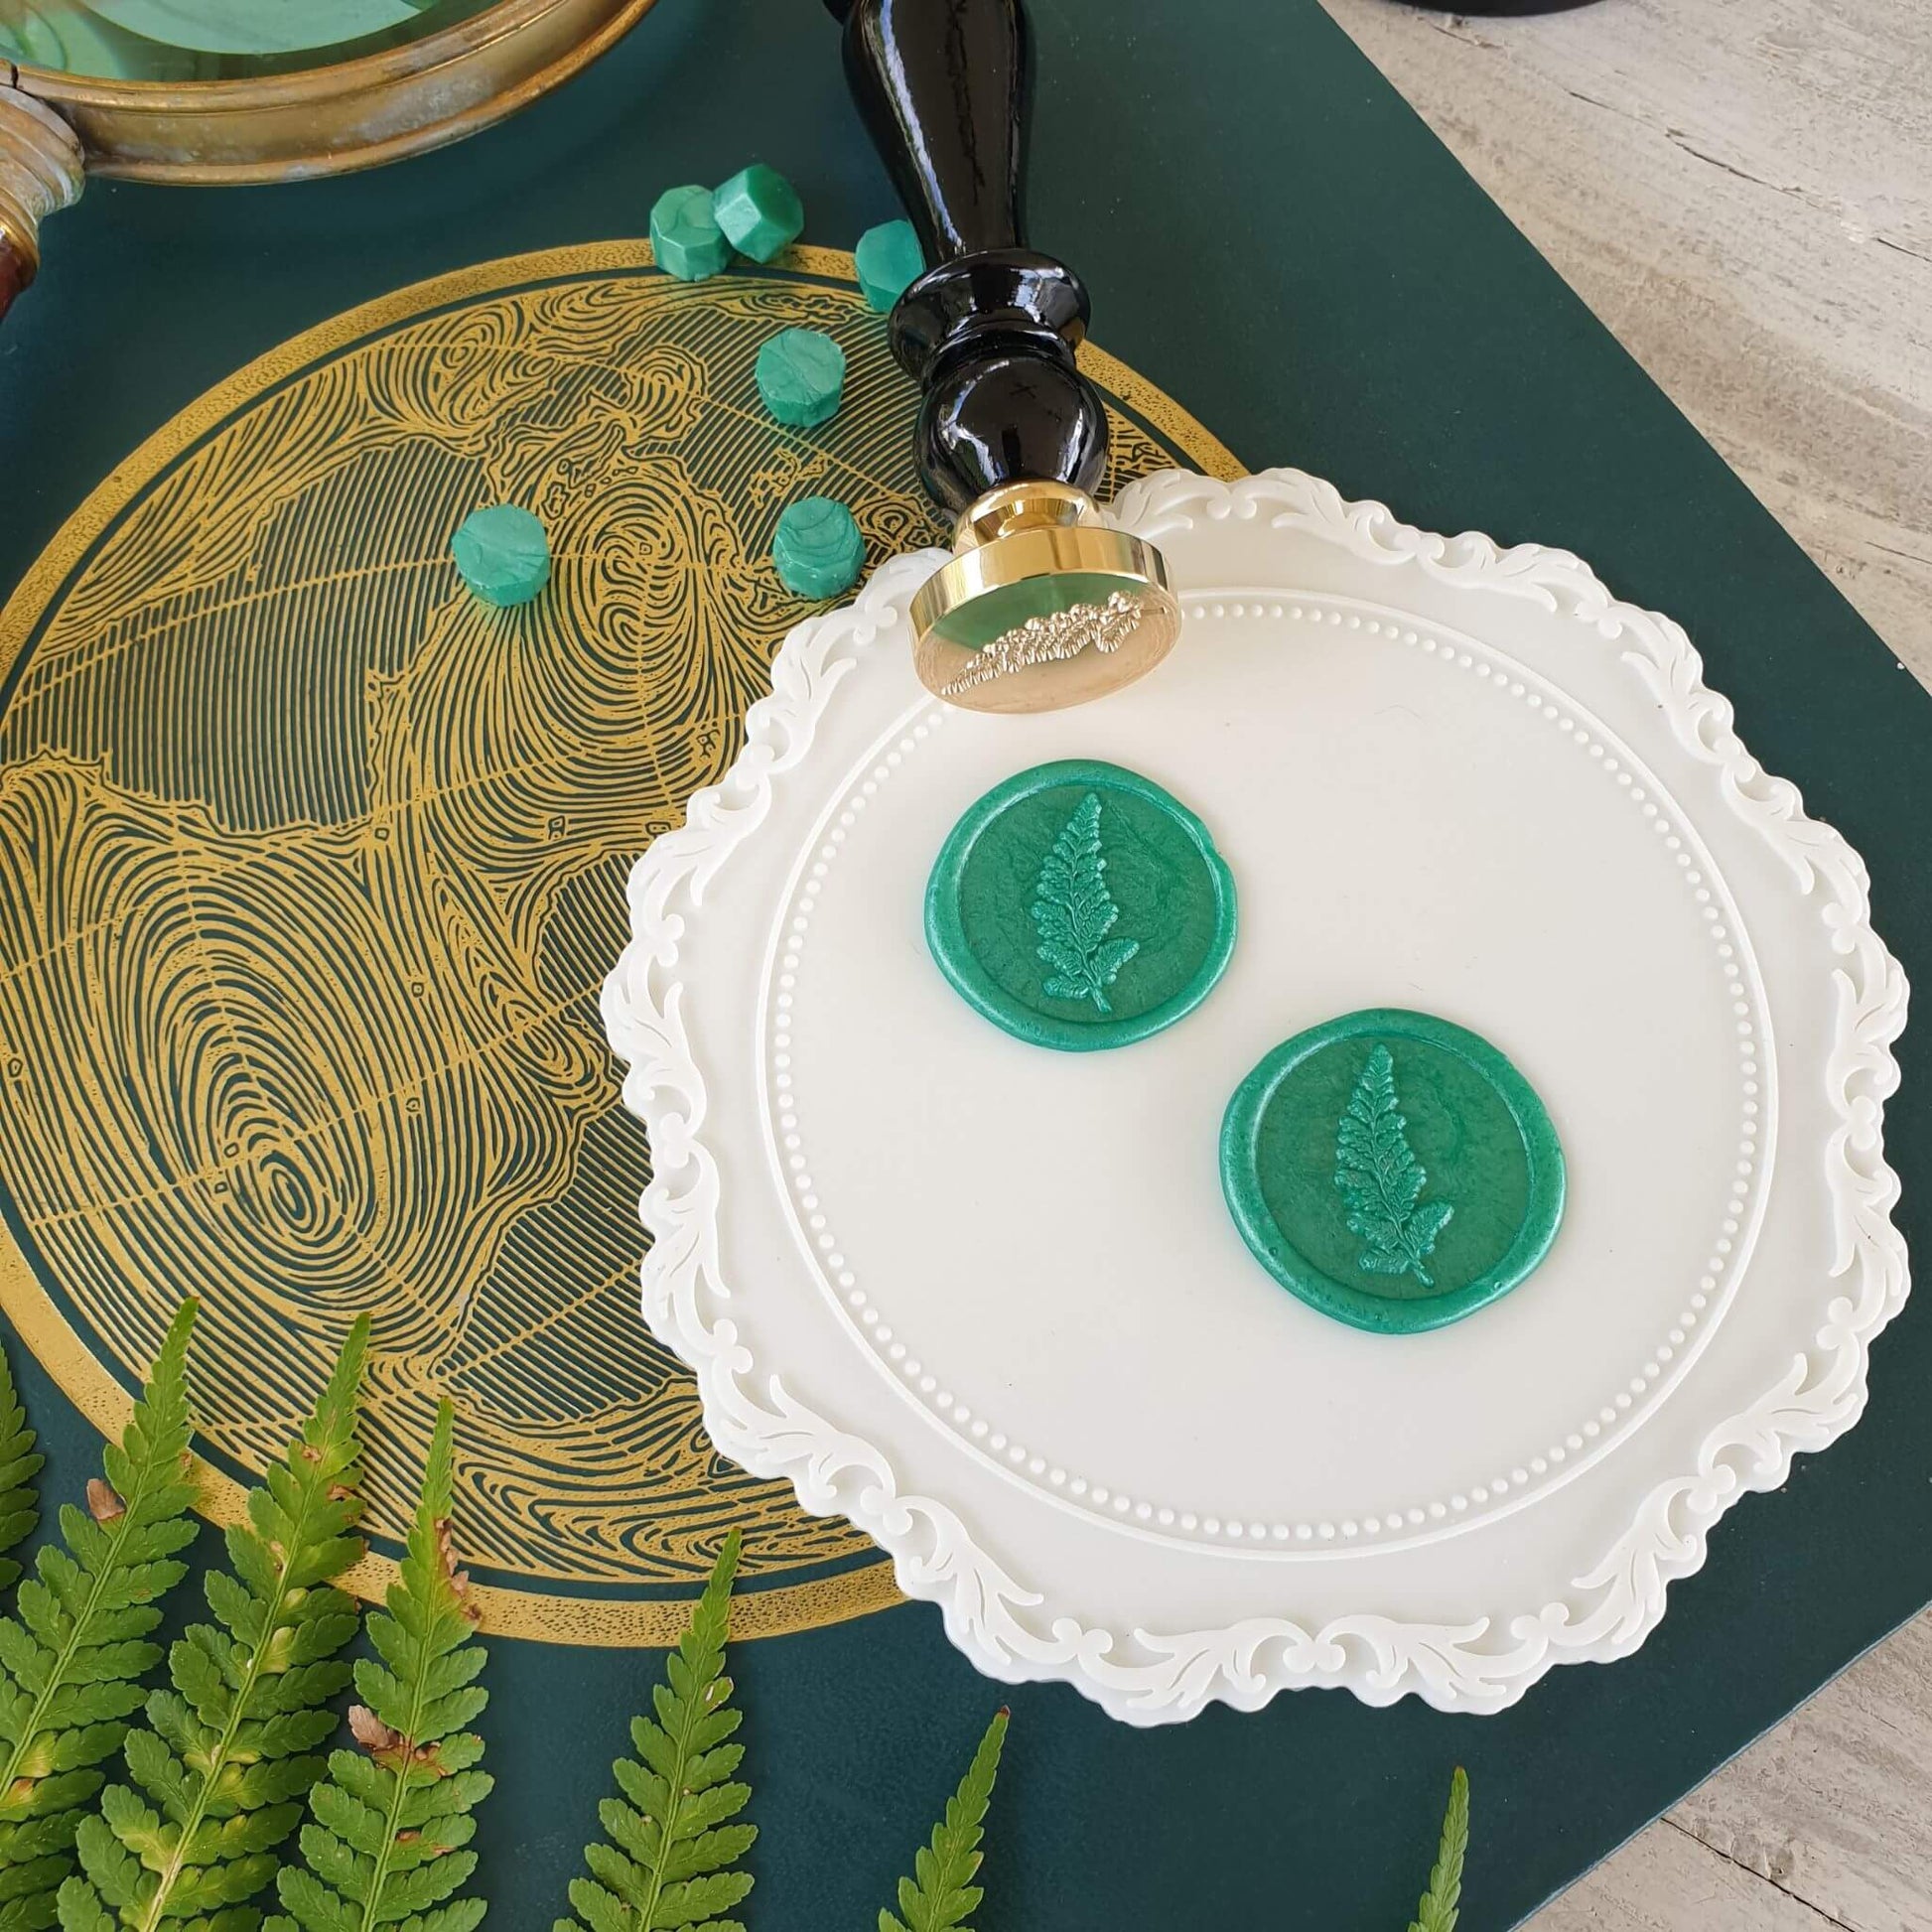 Fern leaf wax seal stamp and green wax seals with green sealing wax beads